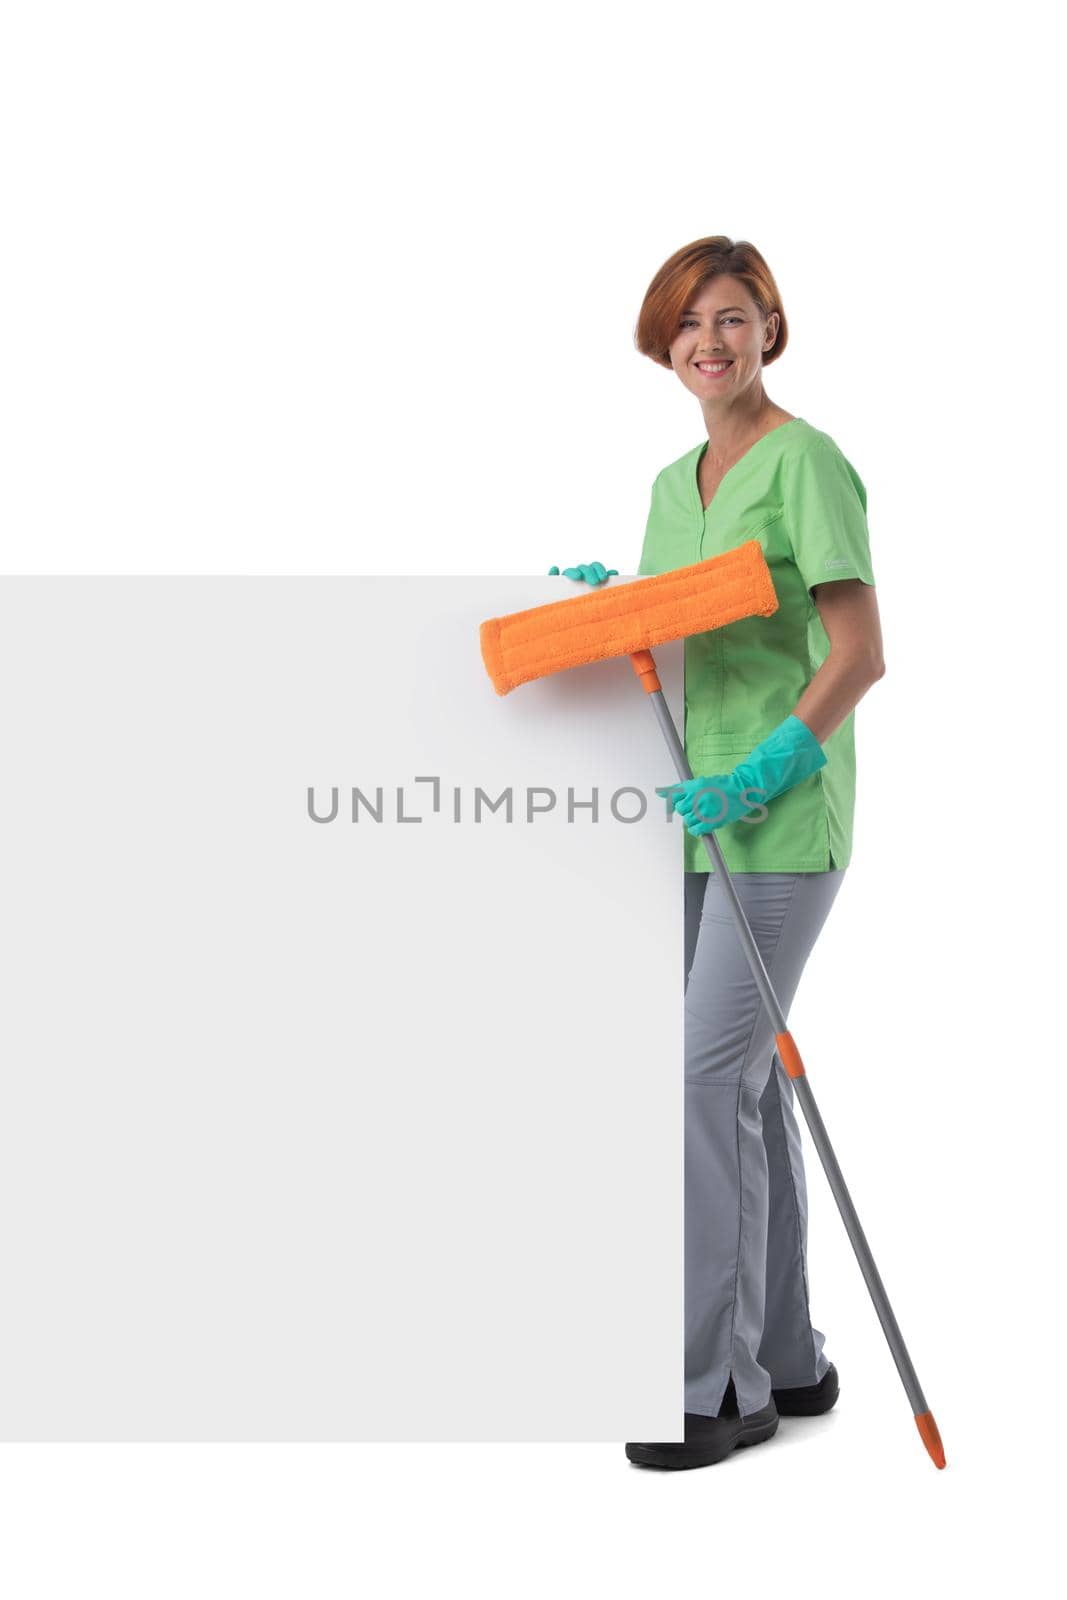 Cleaner woman with mop and blank banner isolated on white background, full length portrait